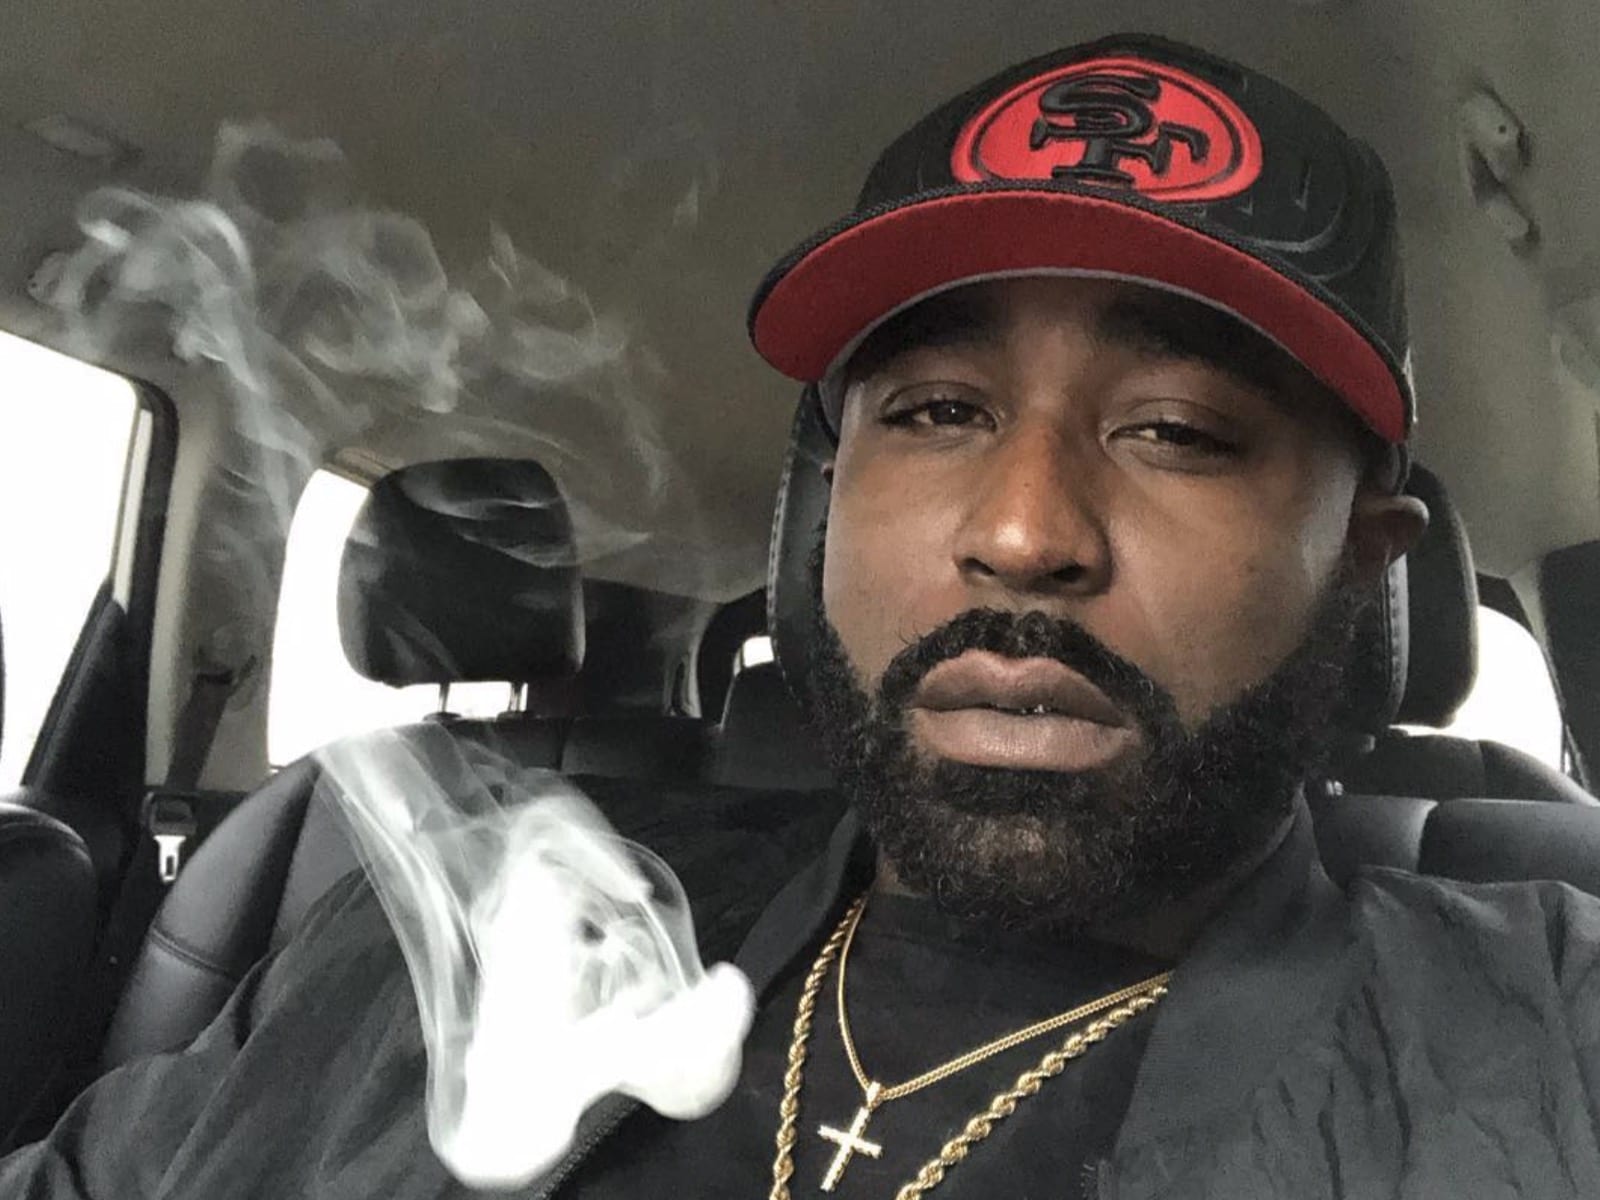 WATCH: US Rapper Young Buck Confesses to Dating A Transgender Woman